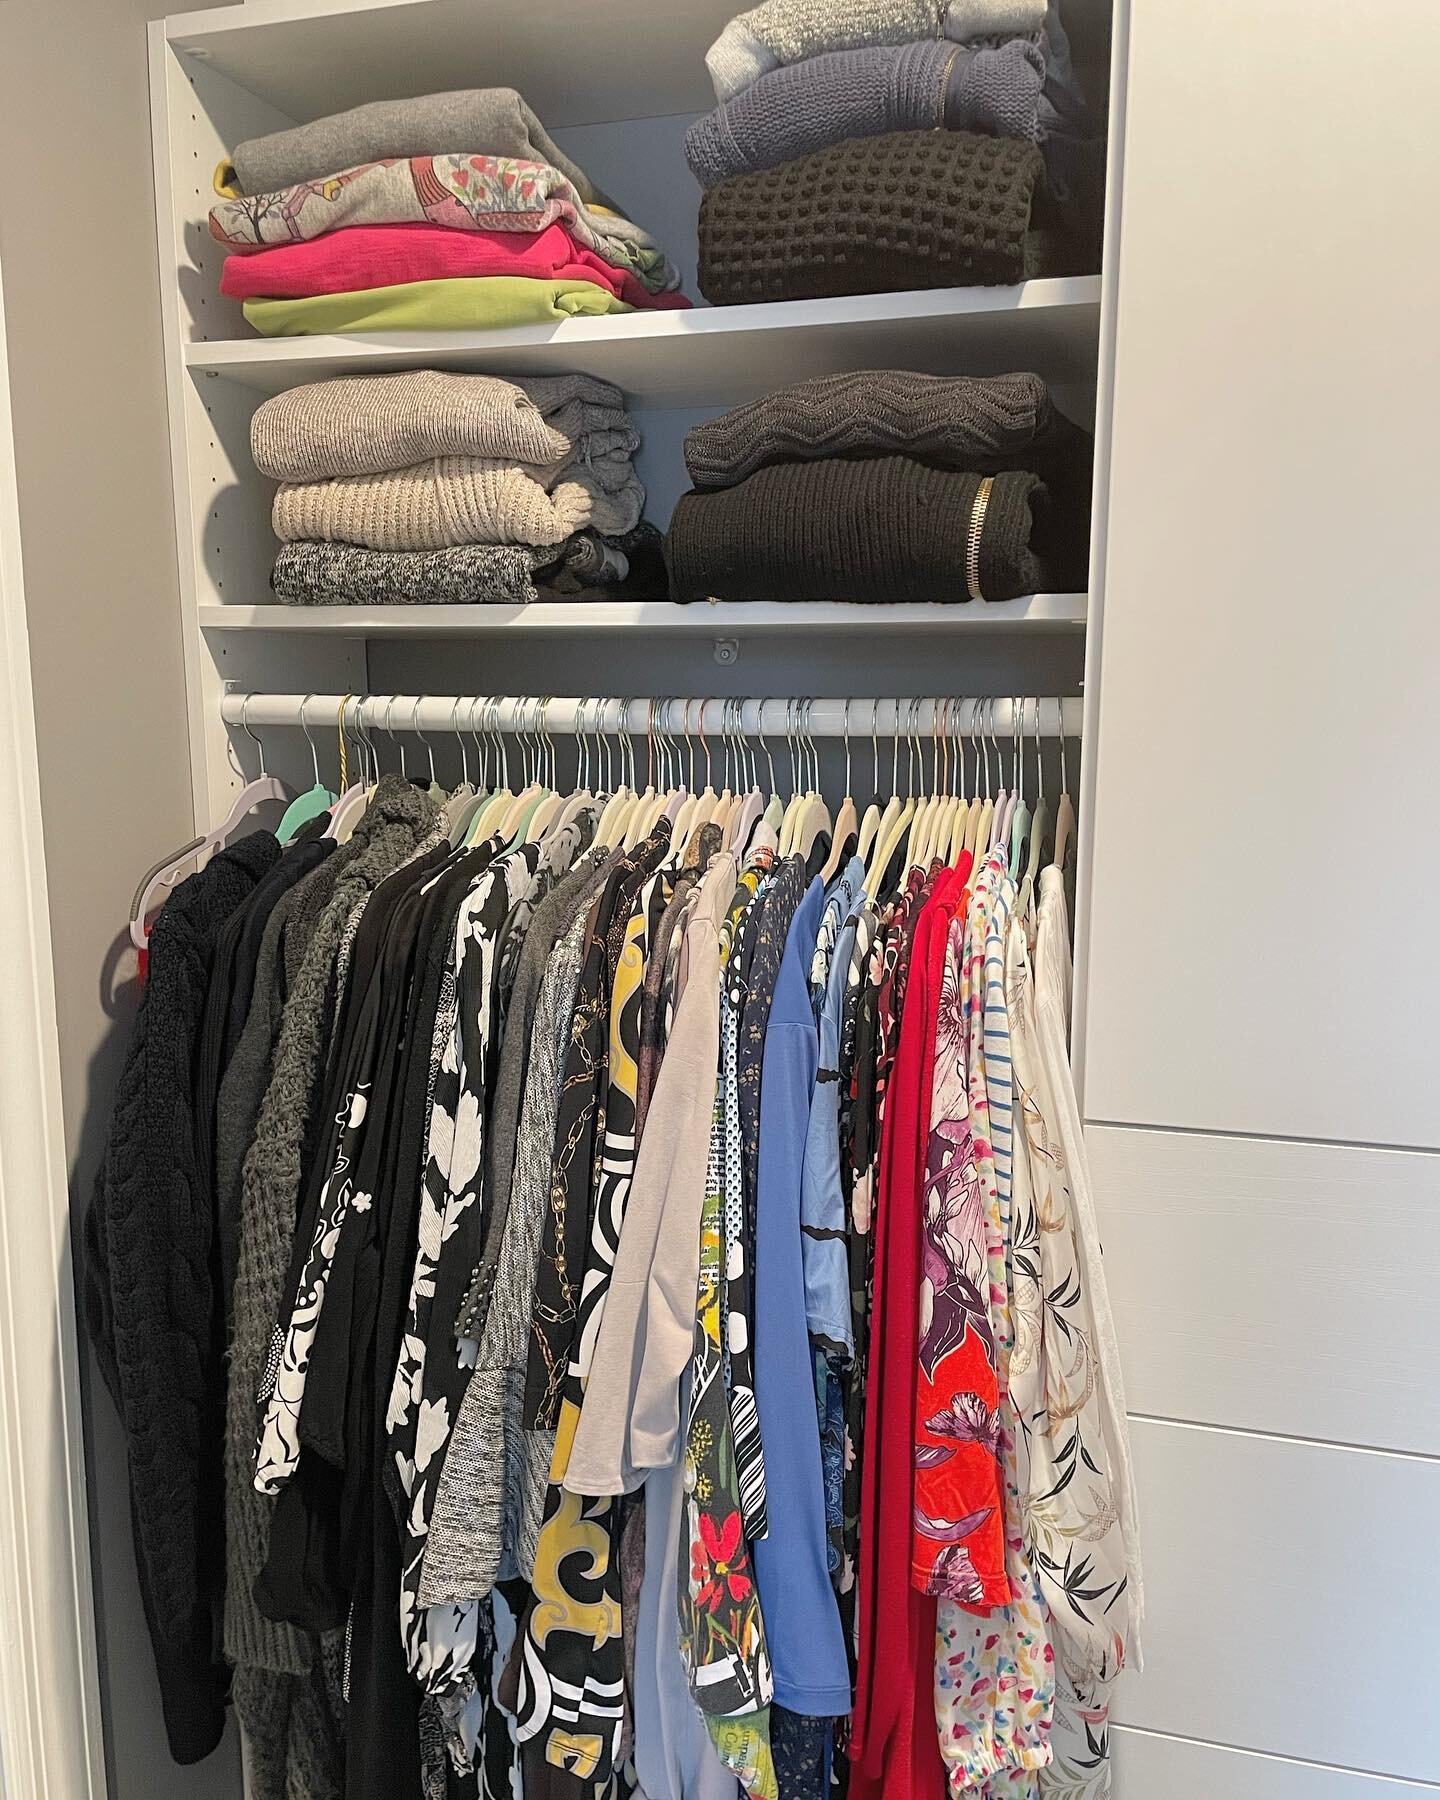 &bull; O R D E R &bull;  My Client reached out for help with her Mom&rsquo;s closet. Her mom was convinced her closet was too small and didn&rsquo;t want to get rid of any of her clothes.

I was certain I could help. By using slim/uniform hangars and